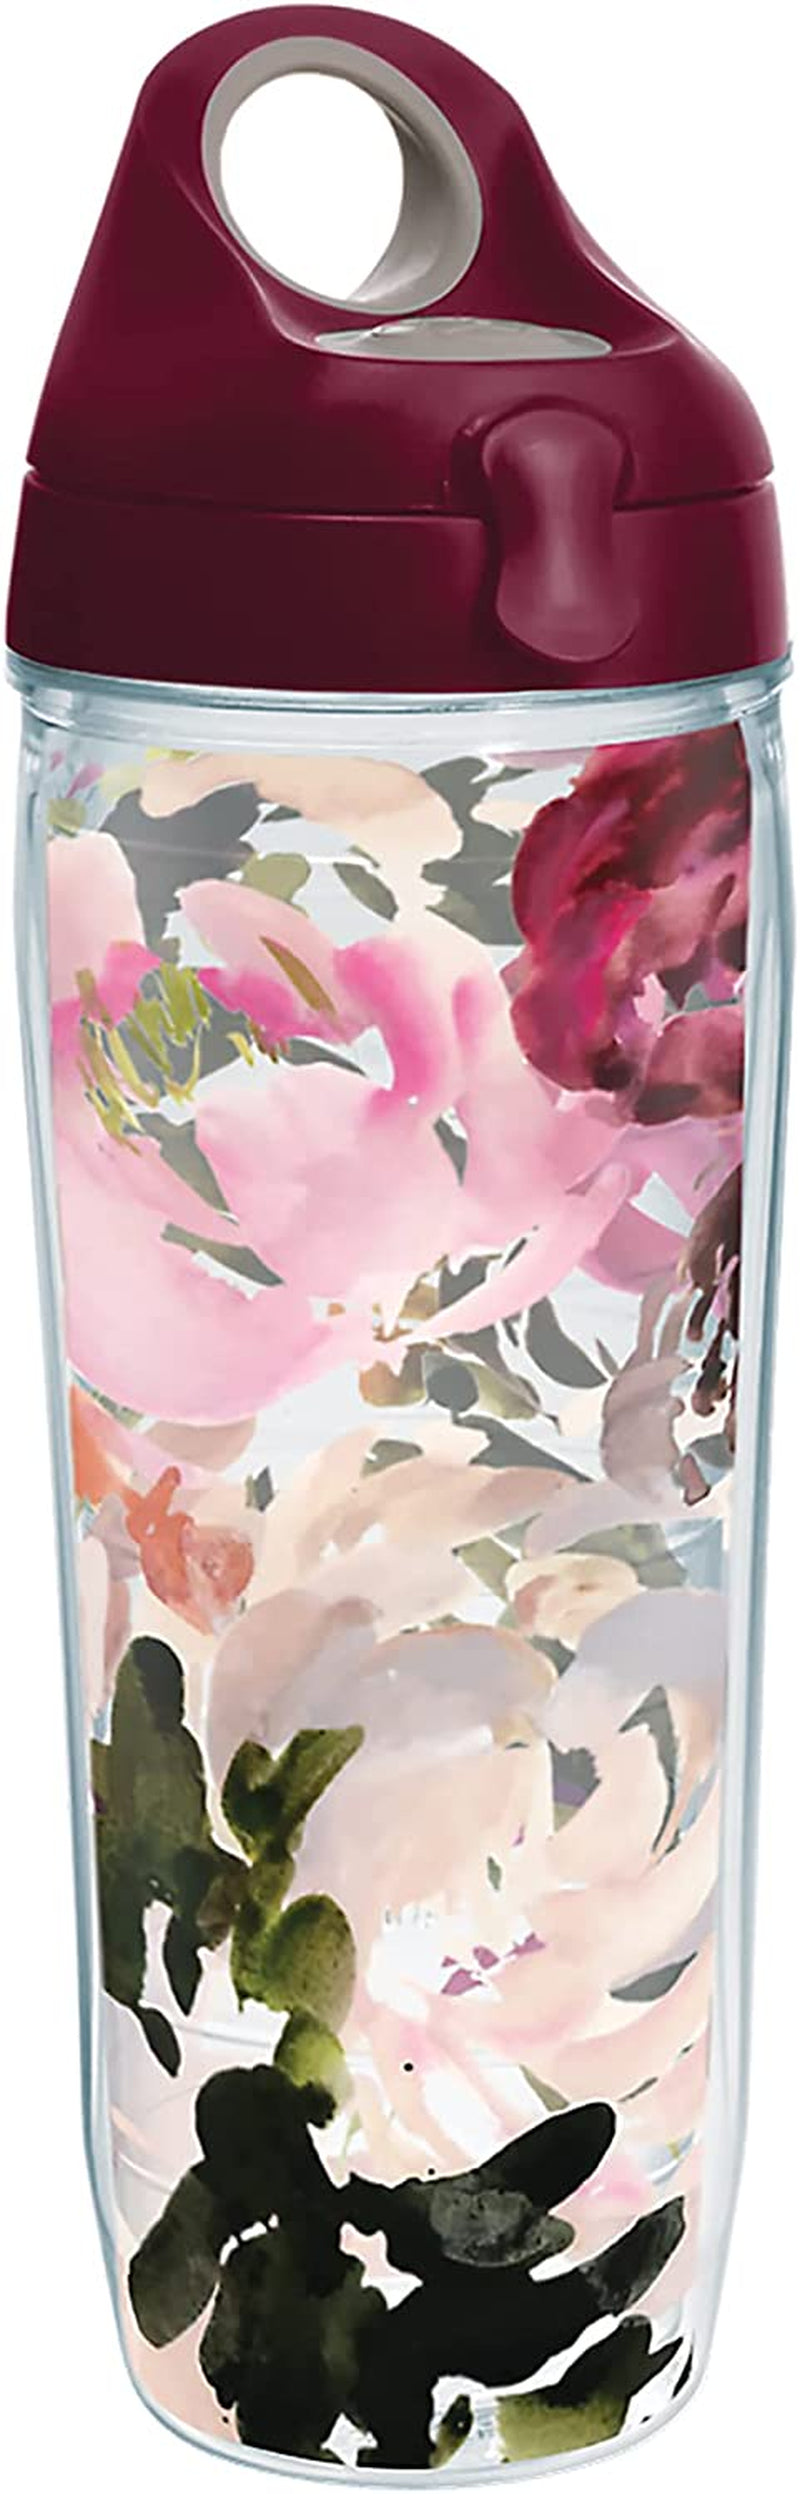 Tervis Made in USA Double Walled Kelly Ventura Floral Collection Insulated Tumbler Cup Keeps Drinks Cold & Hot, 16Oz 4Pk - Classic, Assorted Home & Garden > Kitchen & Dining > Tableware > Drinkware Tervis Posy 24oz Water Bottle - Classic 